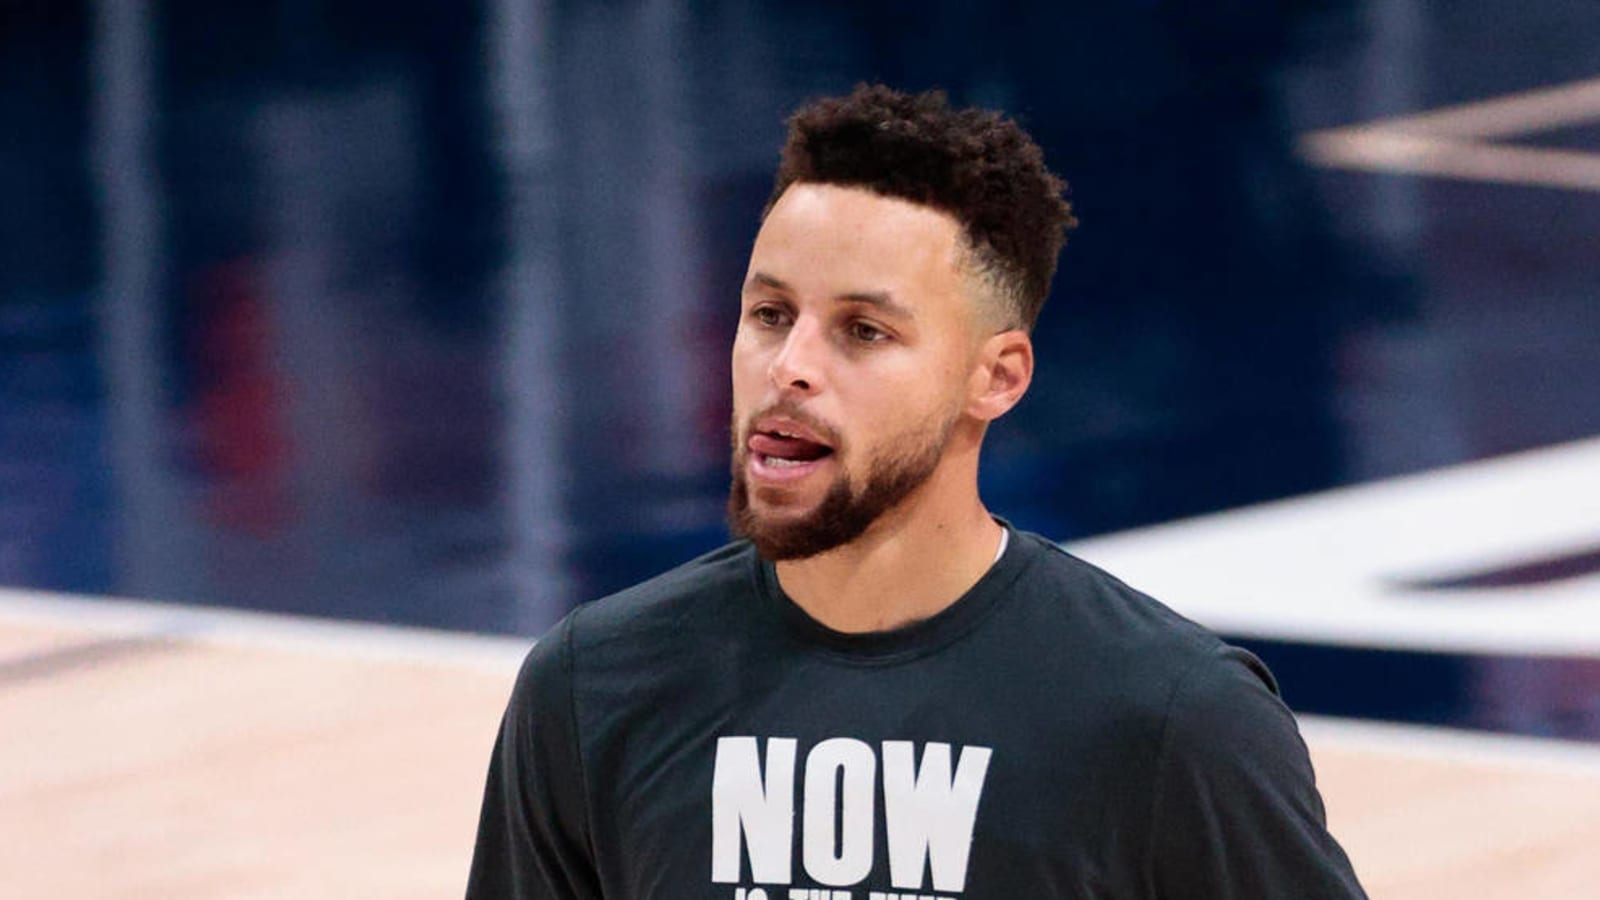 Steph Curry had priceless reaction after being called ‘Wardell’ by reporter